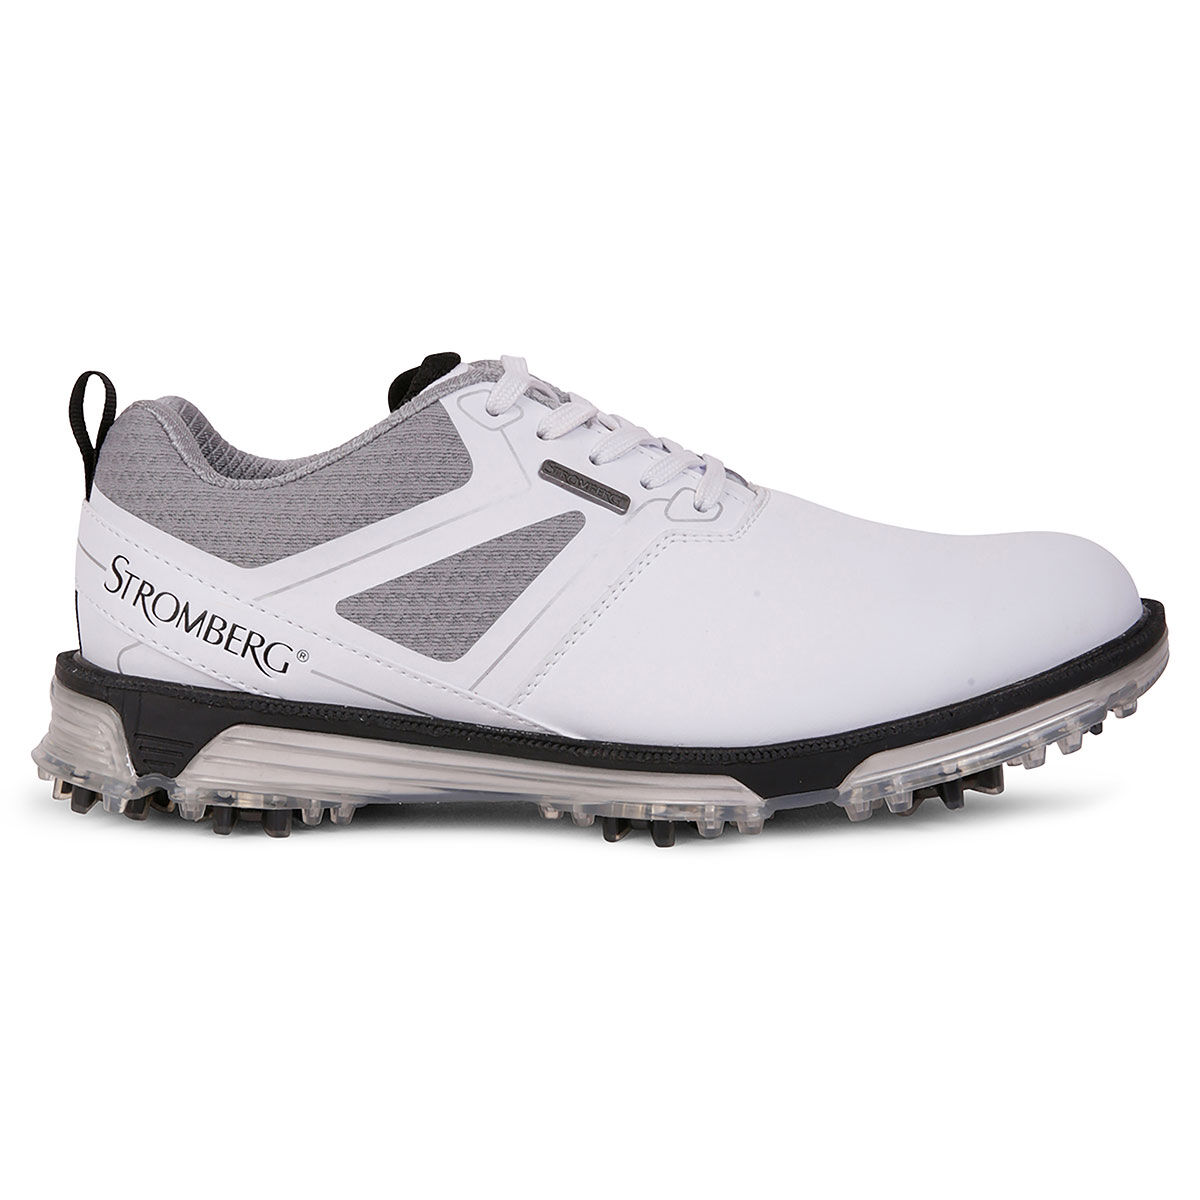 Stromberg Men's Tour Classic Waterproof Spiked Golf Shoes, Mens, White, 8 | American Golf von Stromberg